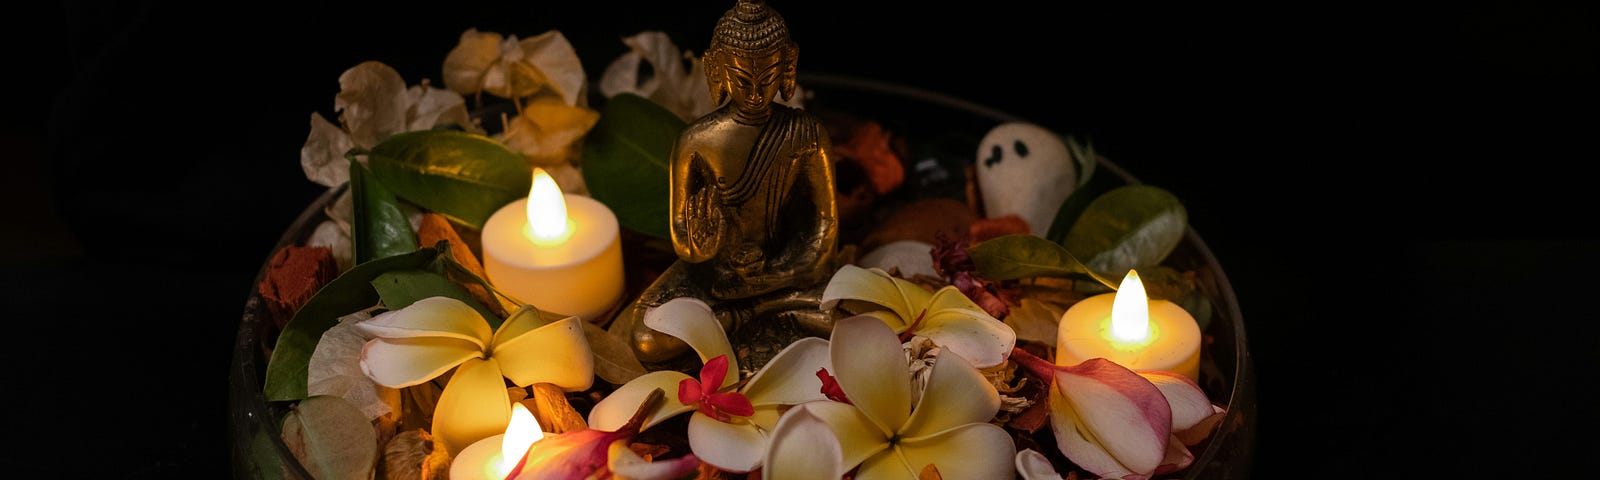 An idol surrounded by flowers and candles